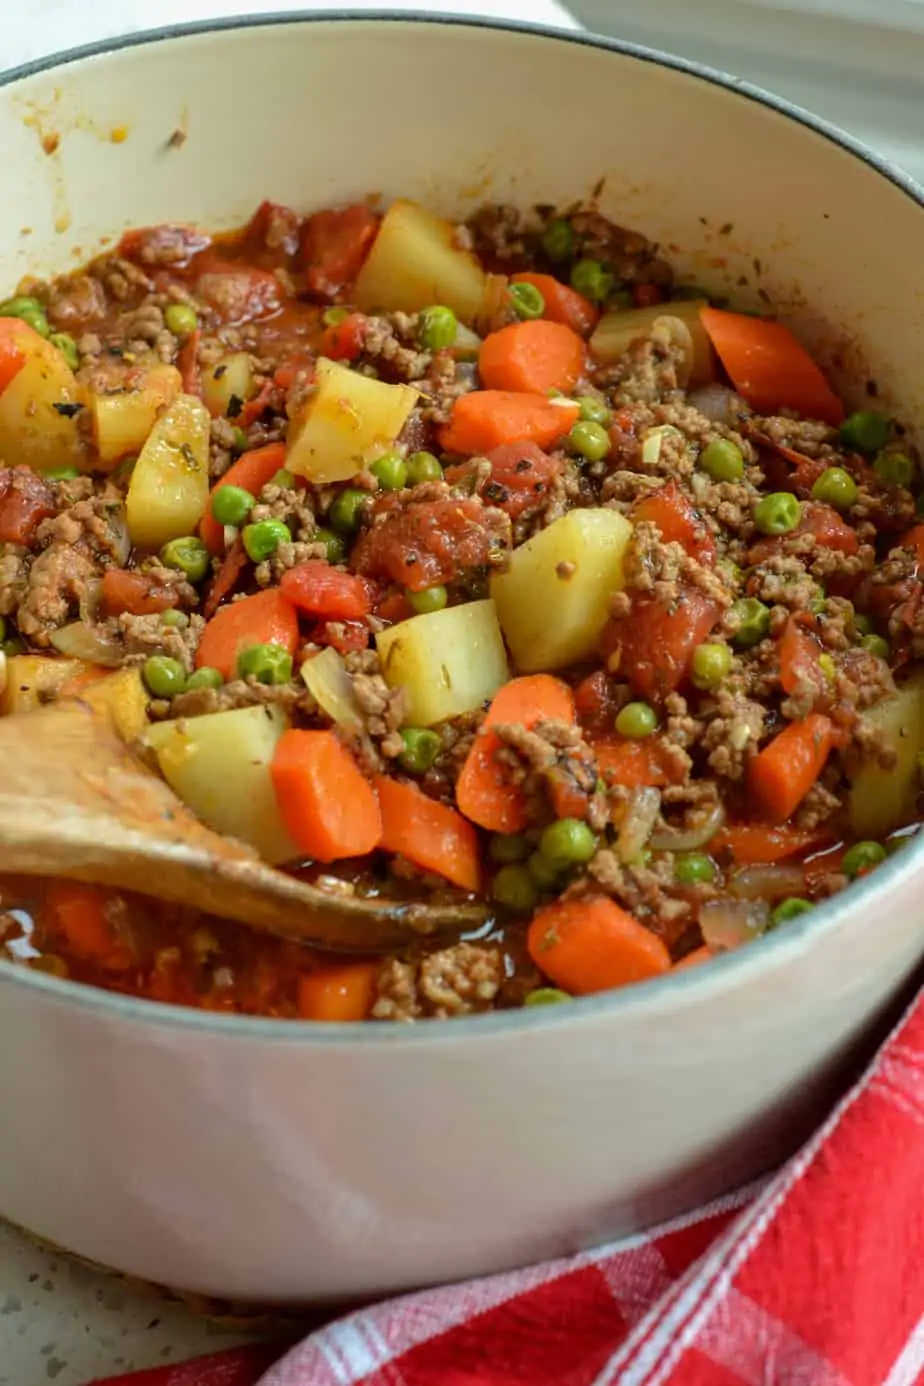 This quick and easy family friendly Hamburger Stew is made in about forty minutes right on the stovetop.